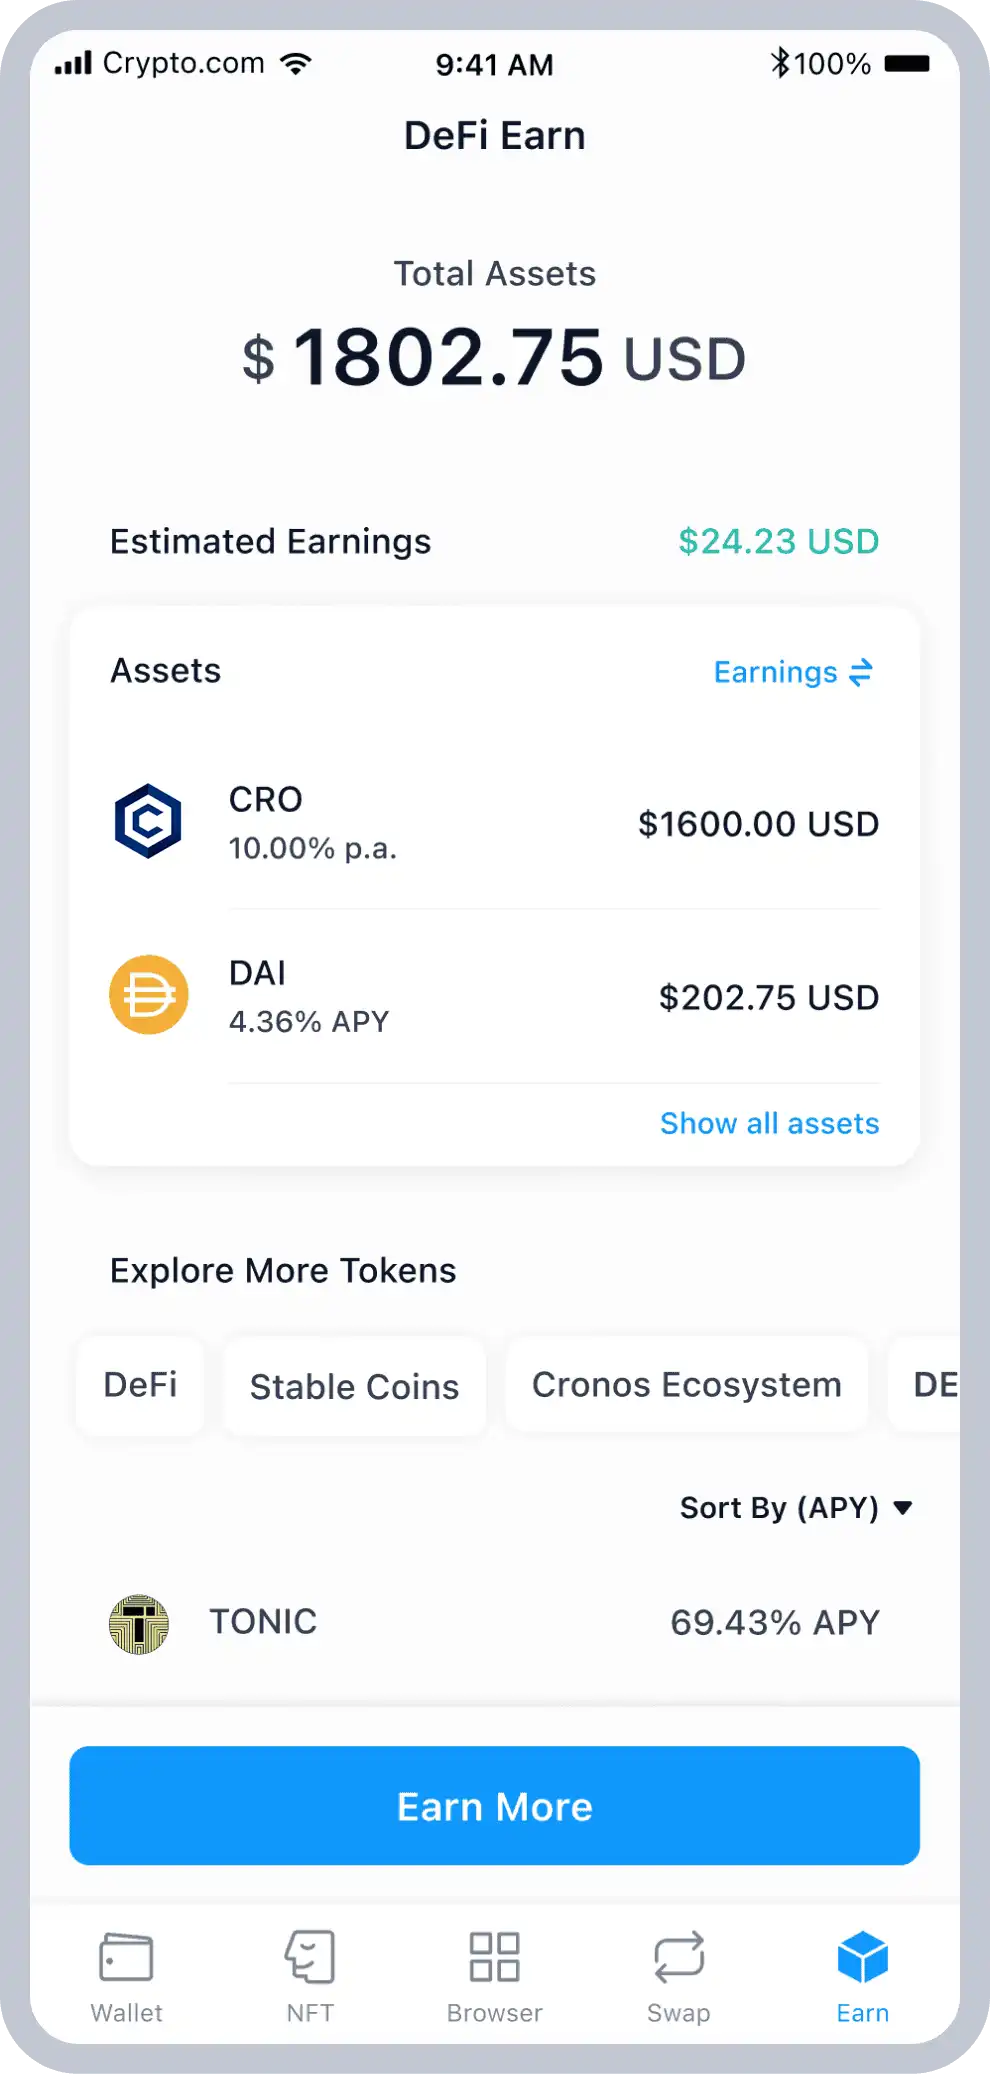 Crypto.com DeFi wallet mobile app interface, the crypto staking (DeFi Earn) page